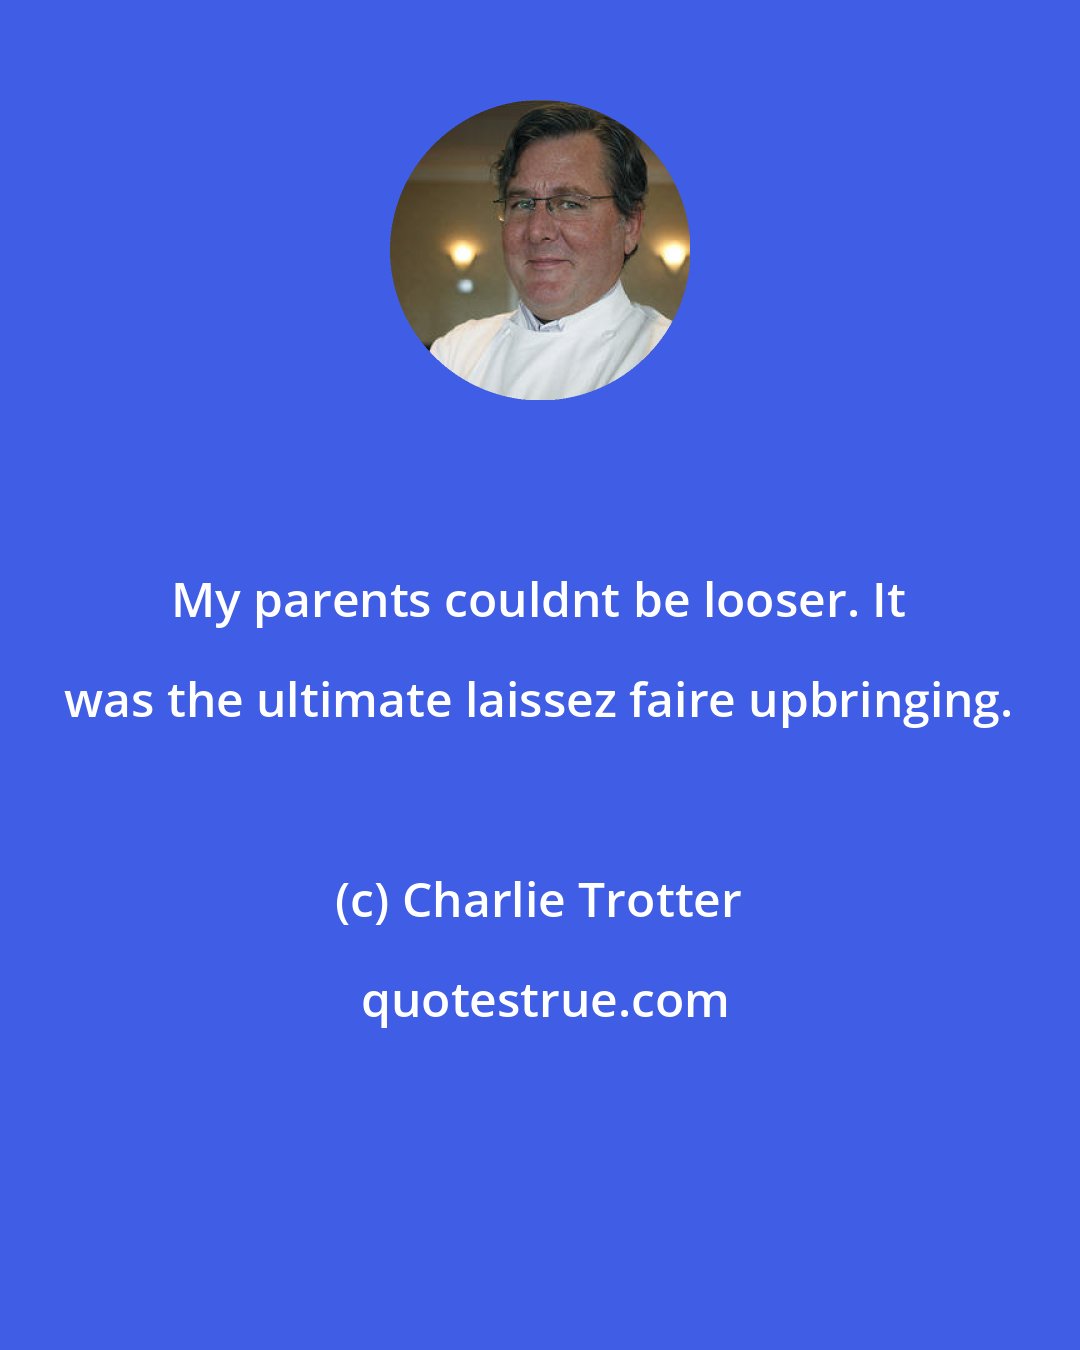 Charlie Trotter: My parents couldnt be looser. It was the ultimate laissez faire upbringing.